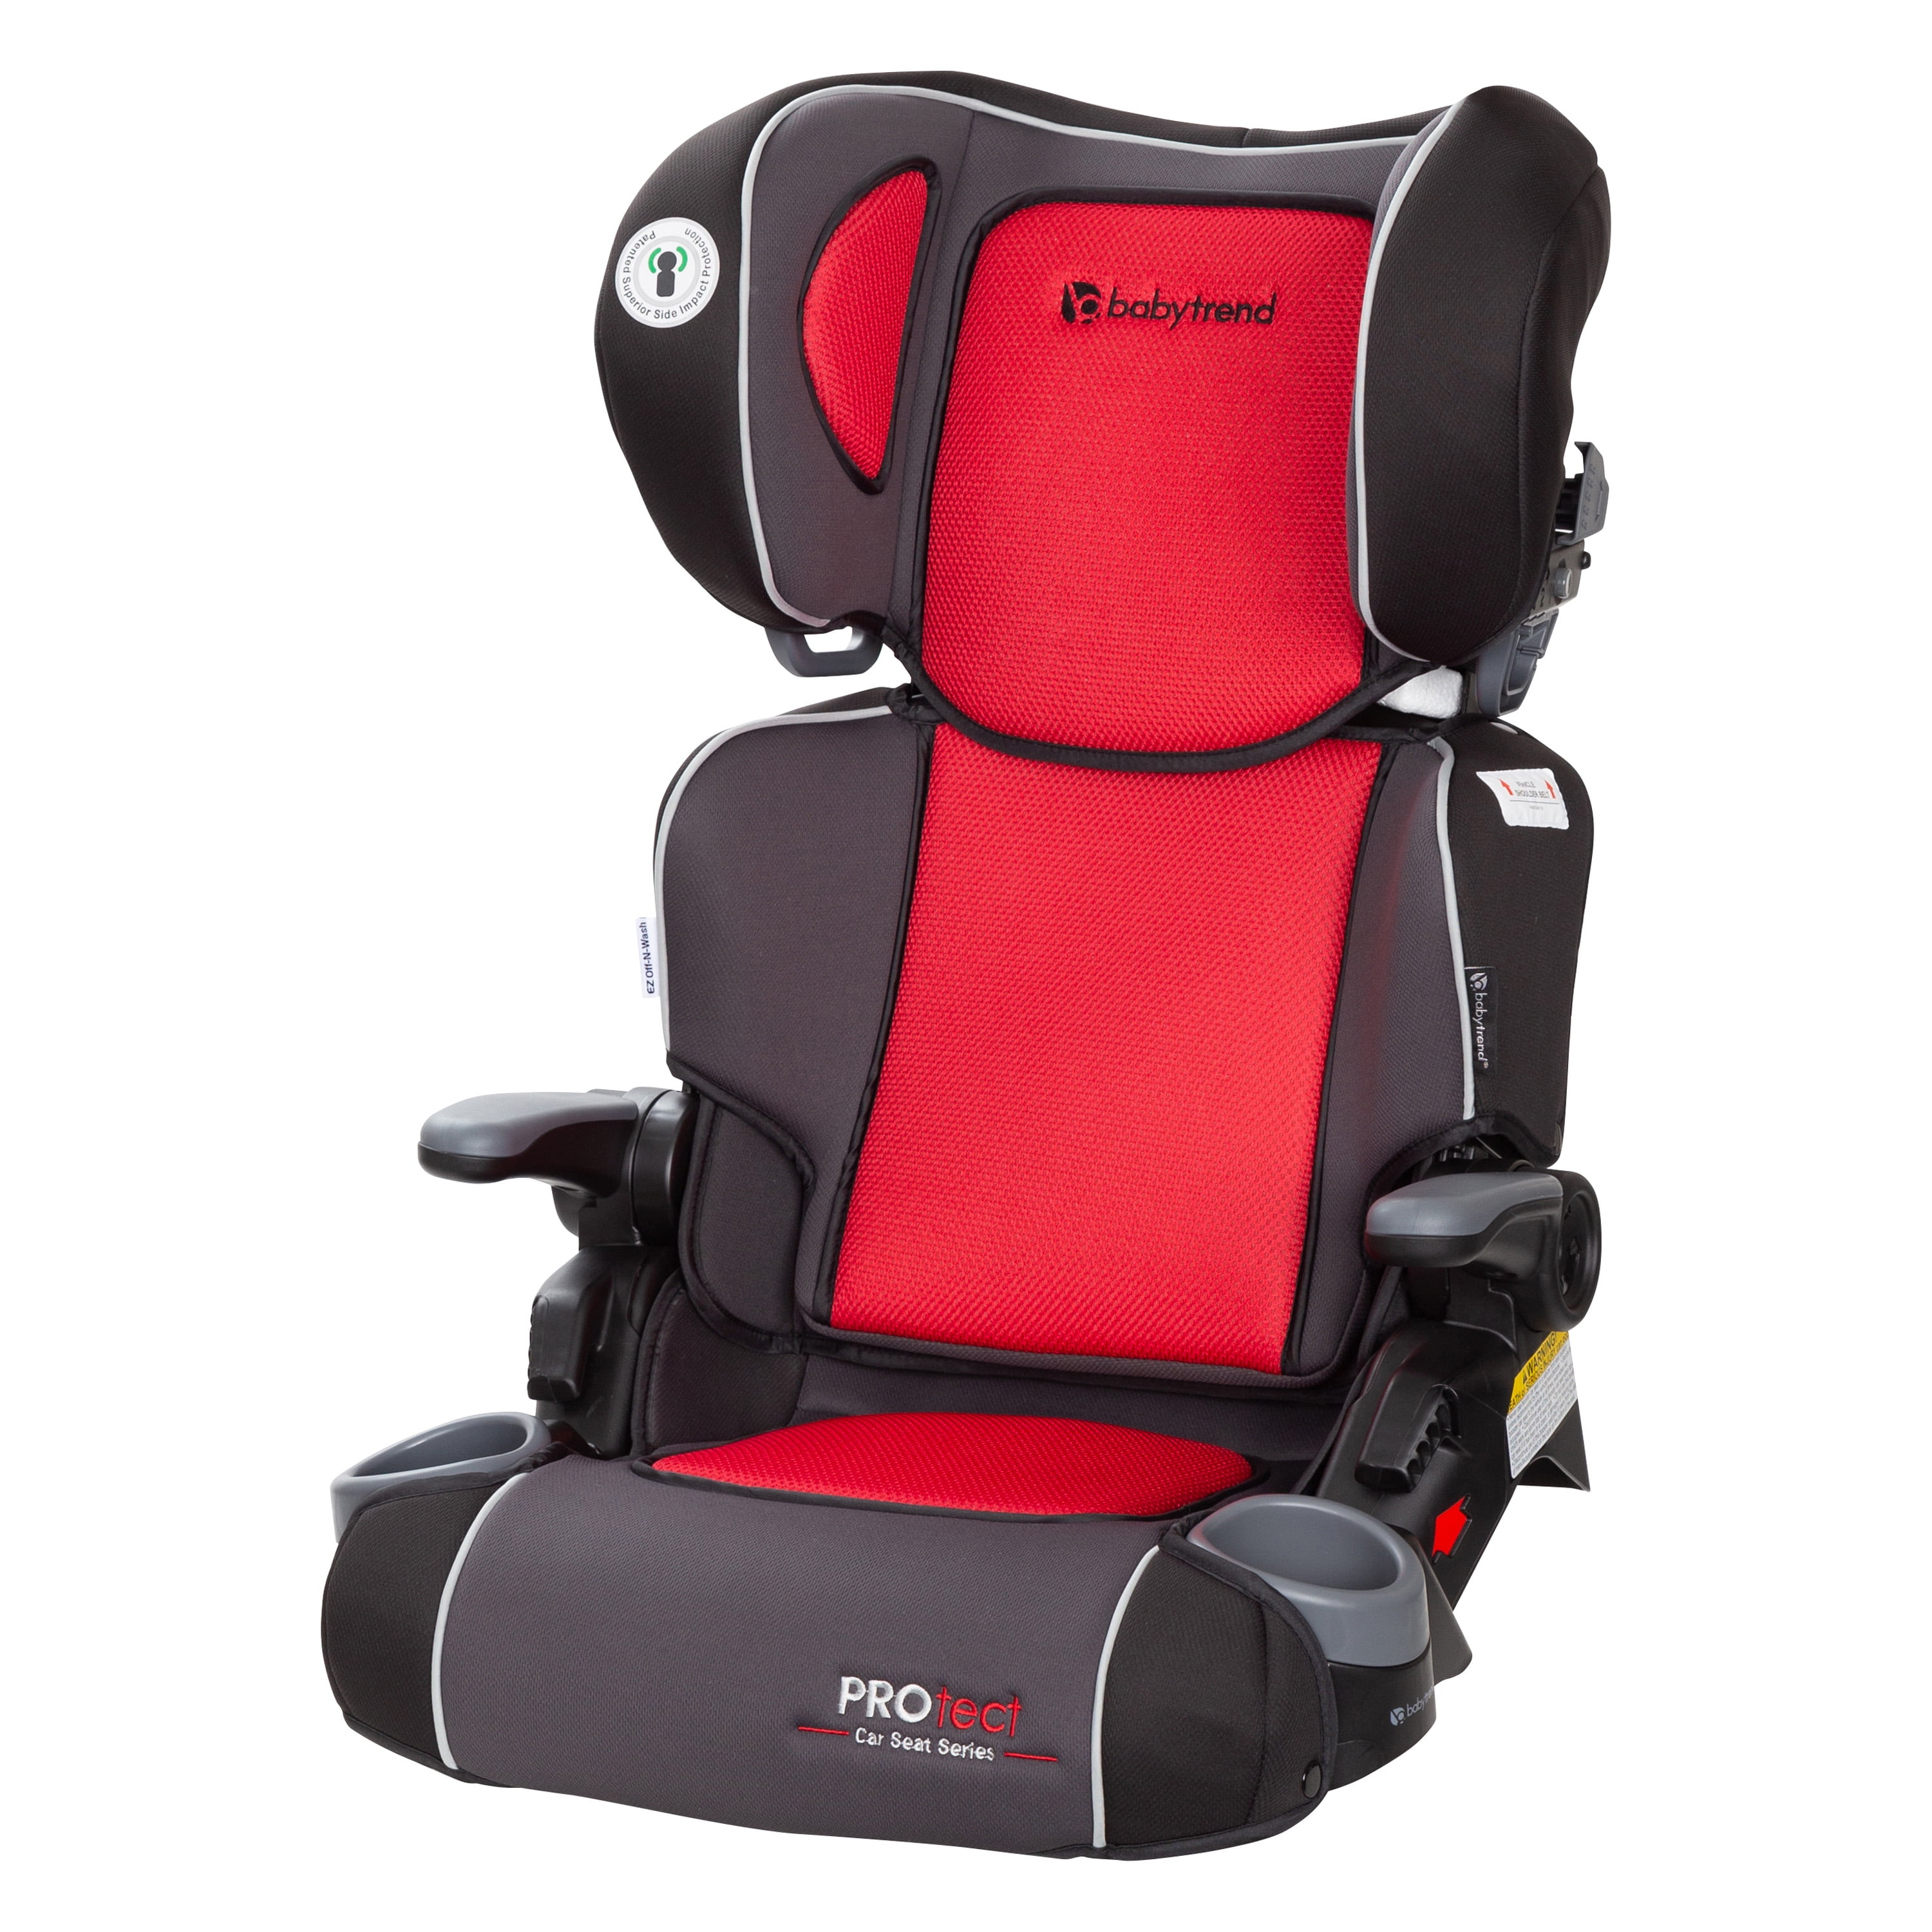 Travel Car Seat For A 5 Year Old, What Car Seat Should My 5 Year Old Use